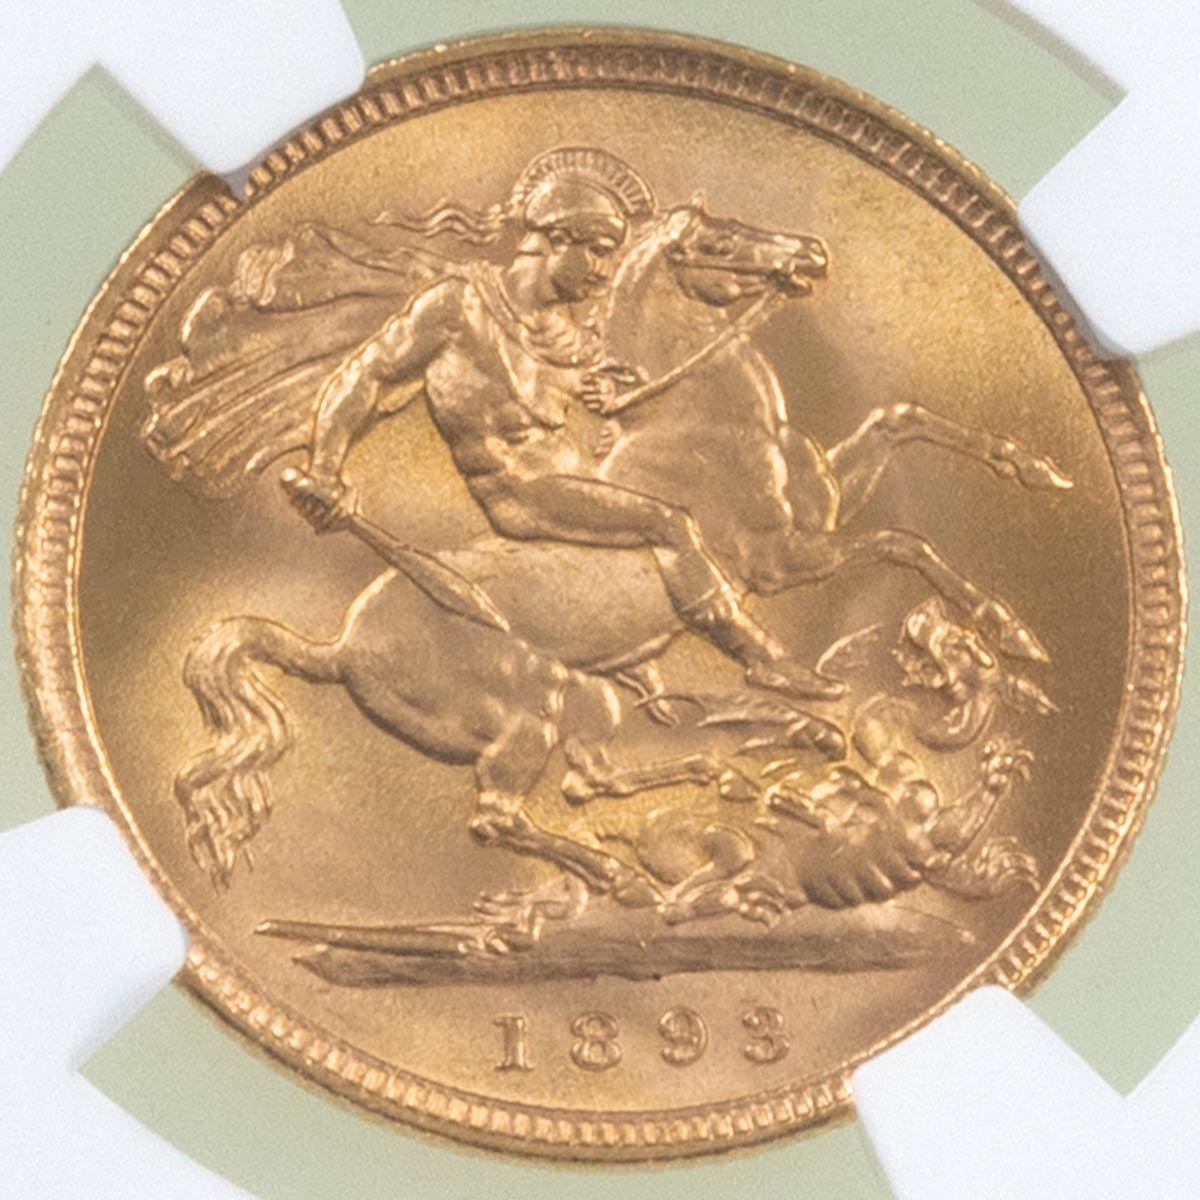 1893 Queen Victoria Gold Half Sovereign London Mint Jubilee Head NGC Graded MS 63 Reverse